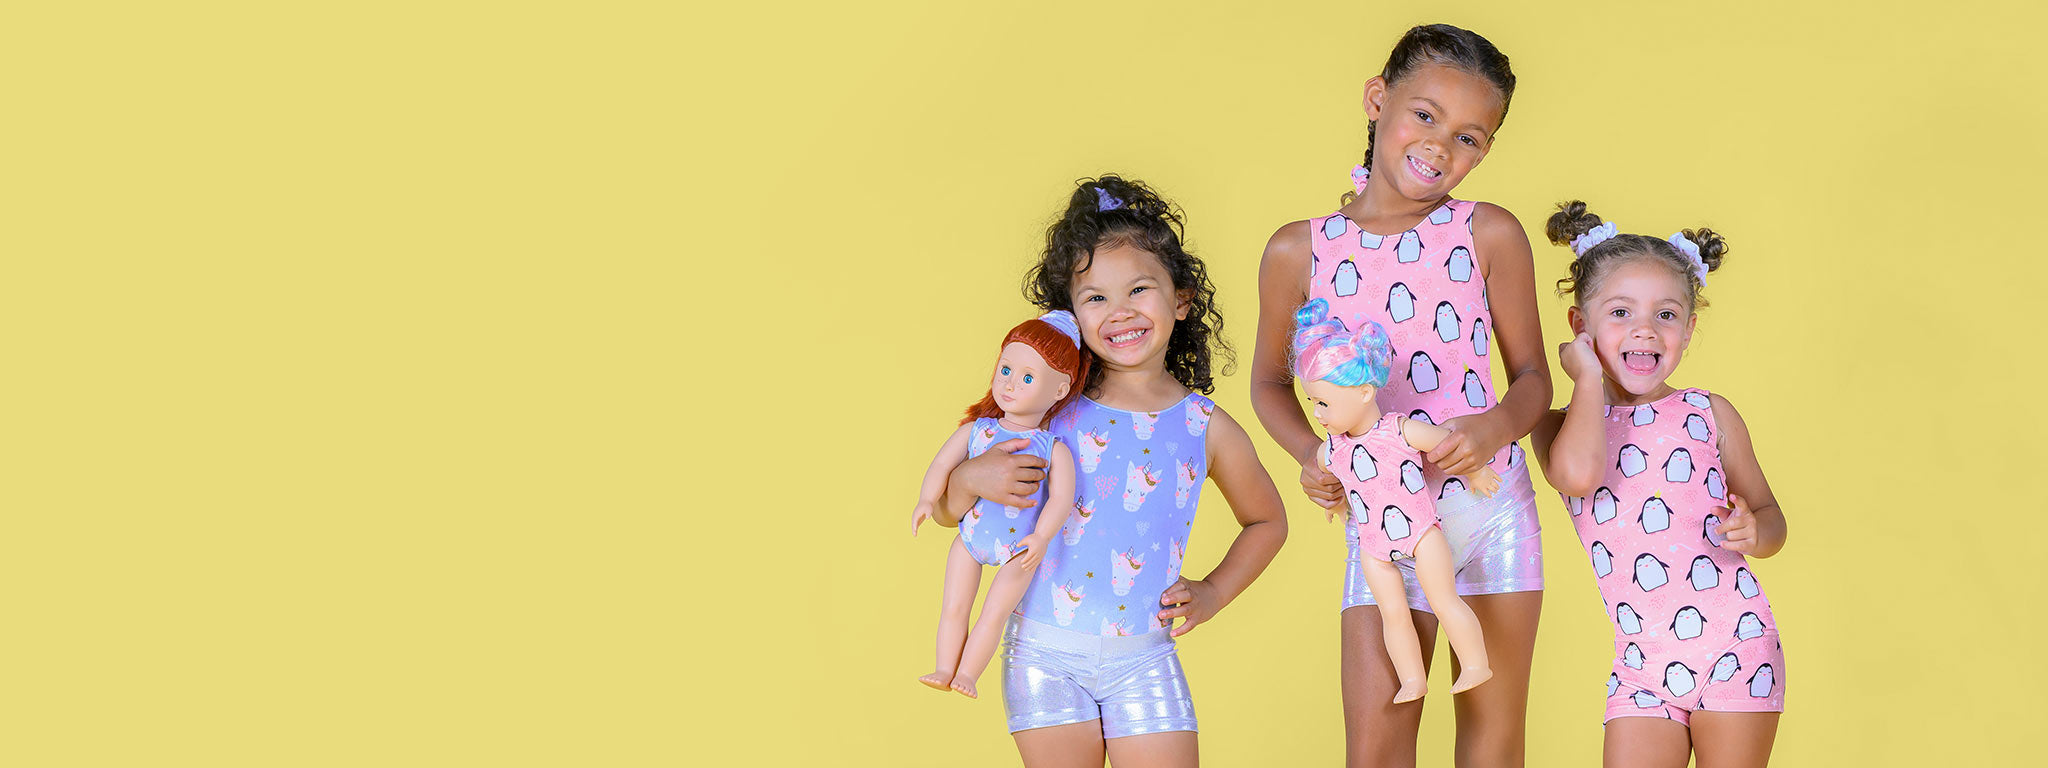 Three girls aged 5-7 years old wear velvet leotards and unitards and metallic silver shorts in front of a solid light yellow background. Two of the girls are holding dolls, which are wearing doll-sized leotards that match the girls'.